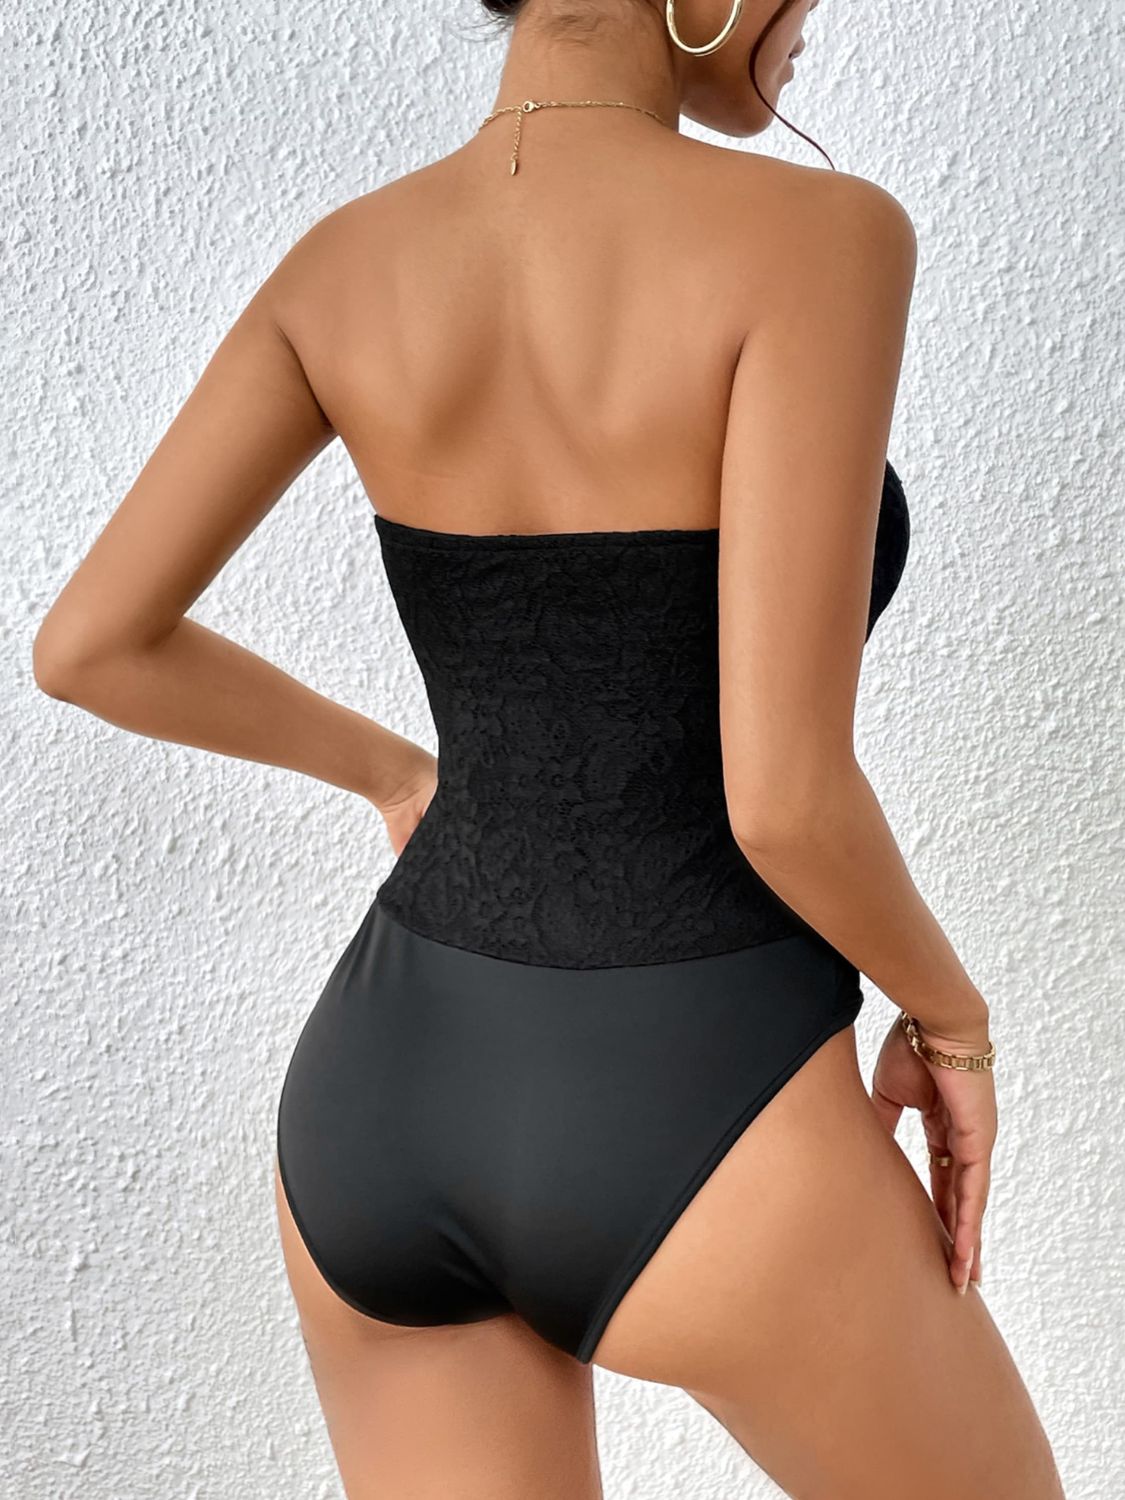 Strapless Sweetheart Neck Bodysuit - Women’s Clothing & Accessories - Shirts & Tops - 2 - 2024